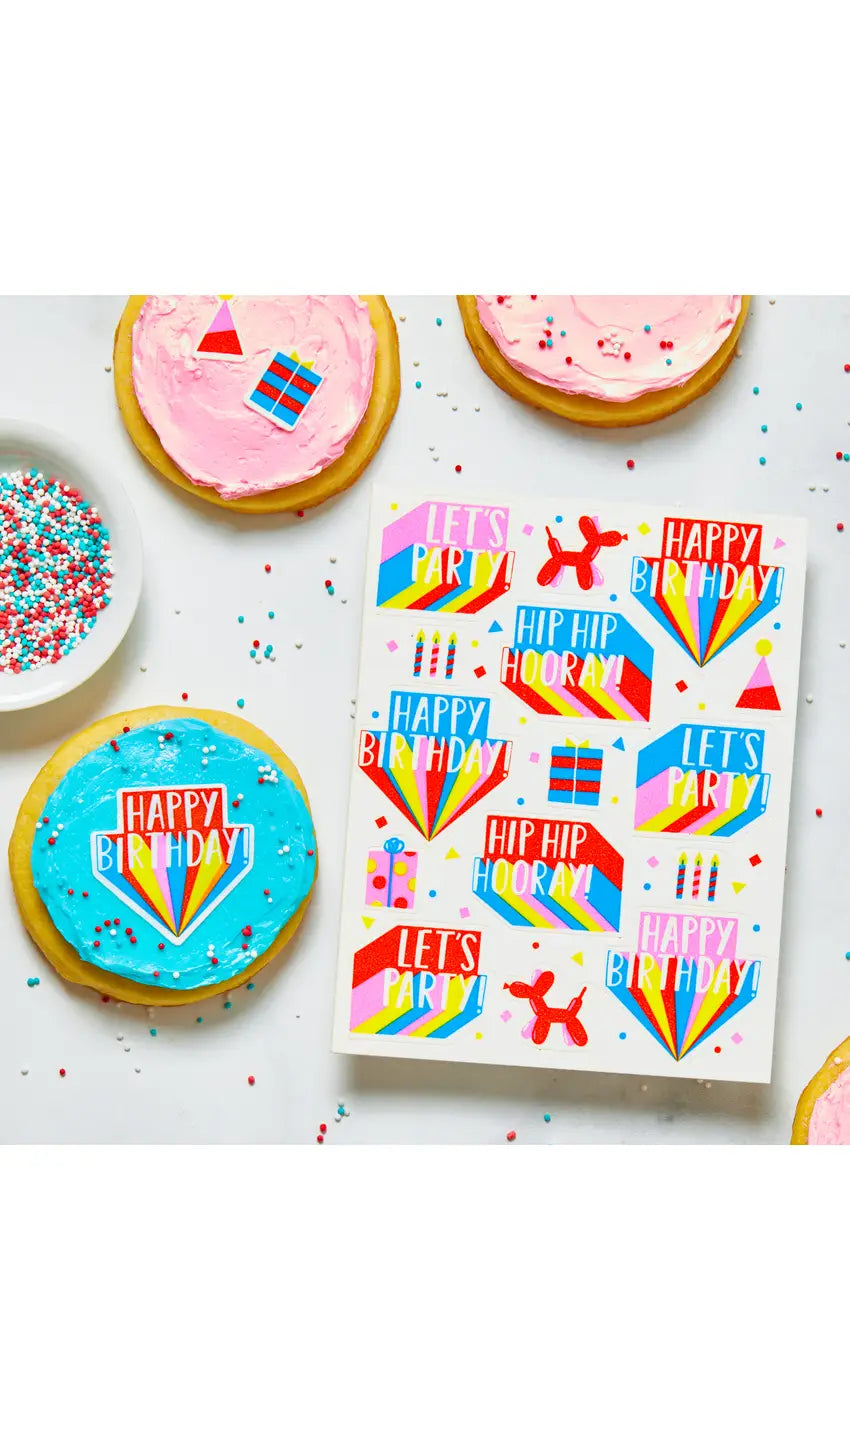 Edible Stickers for Baking & Food Crafts – Happy Birthday